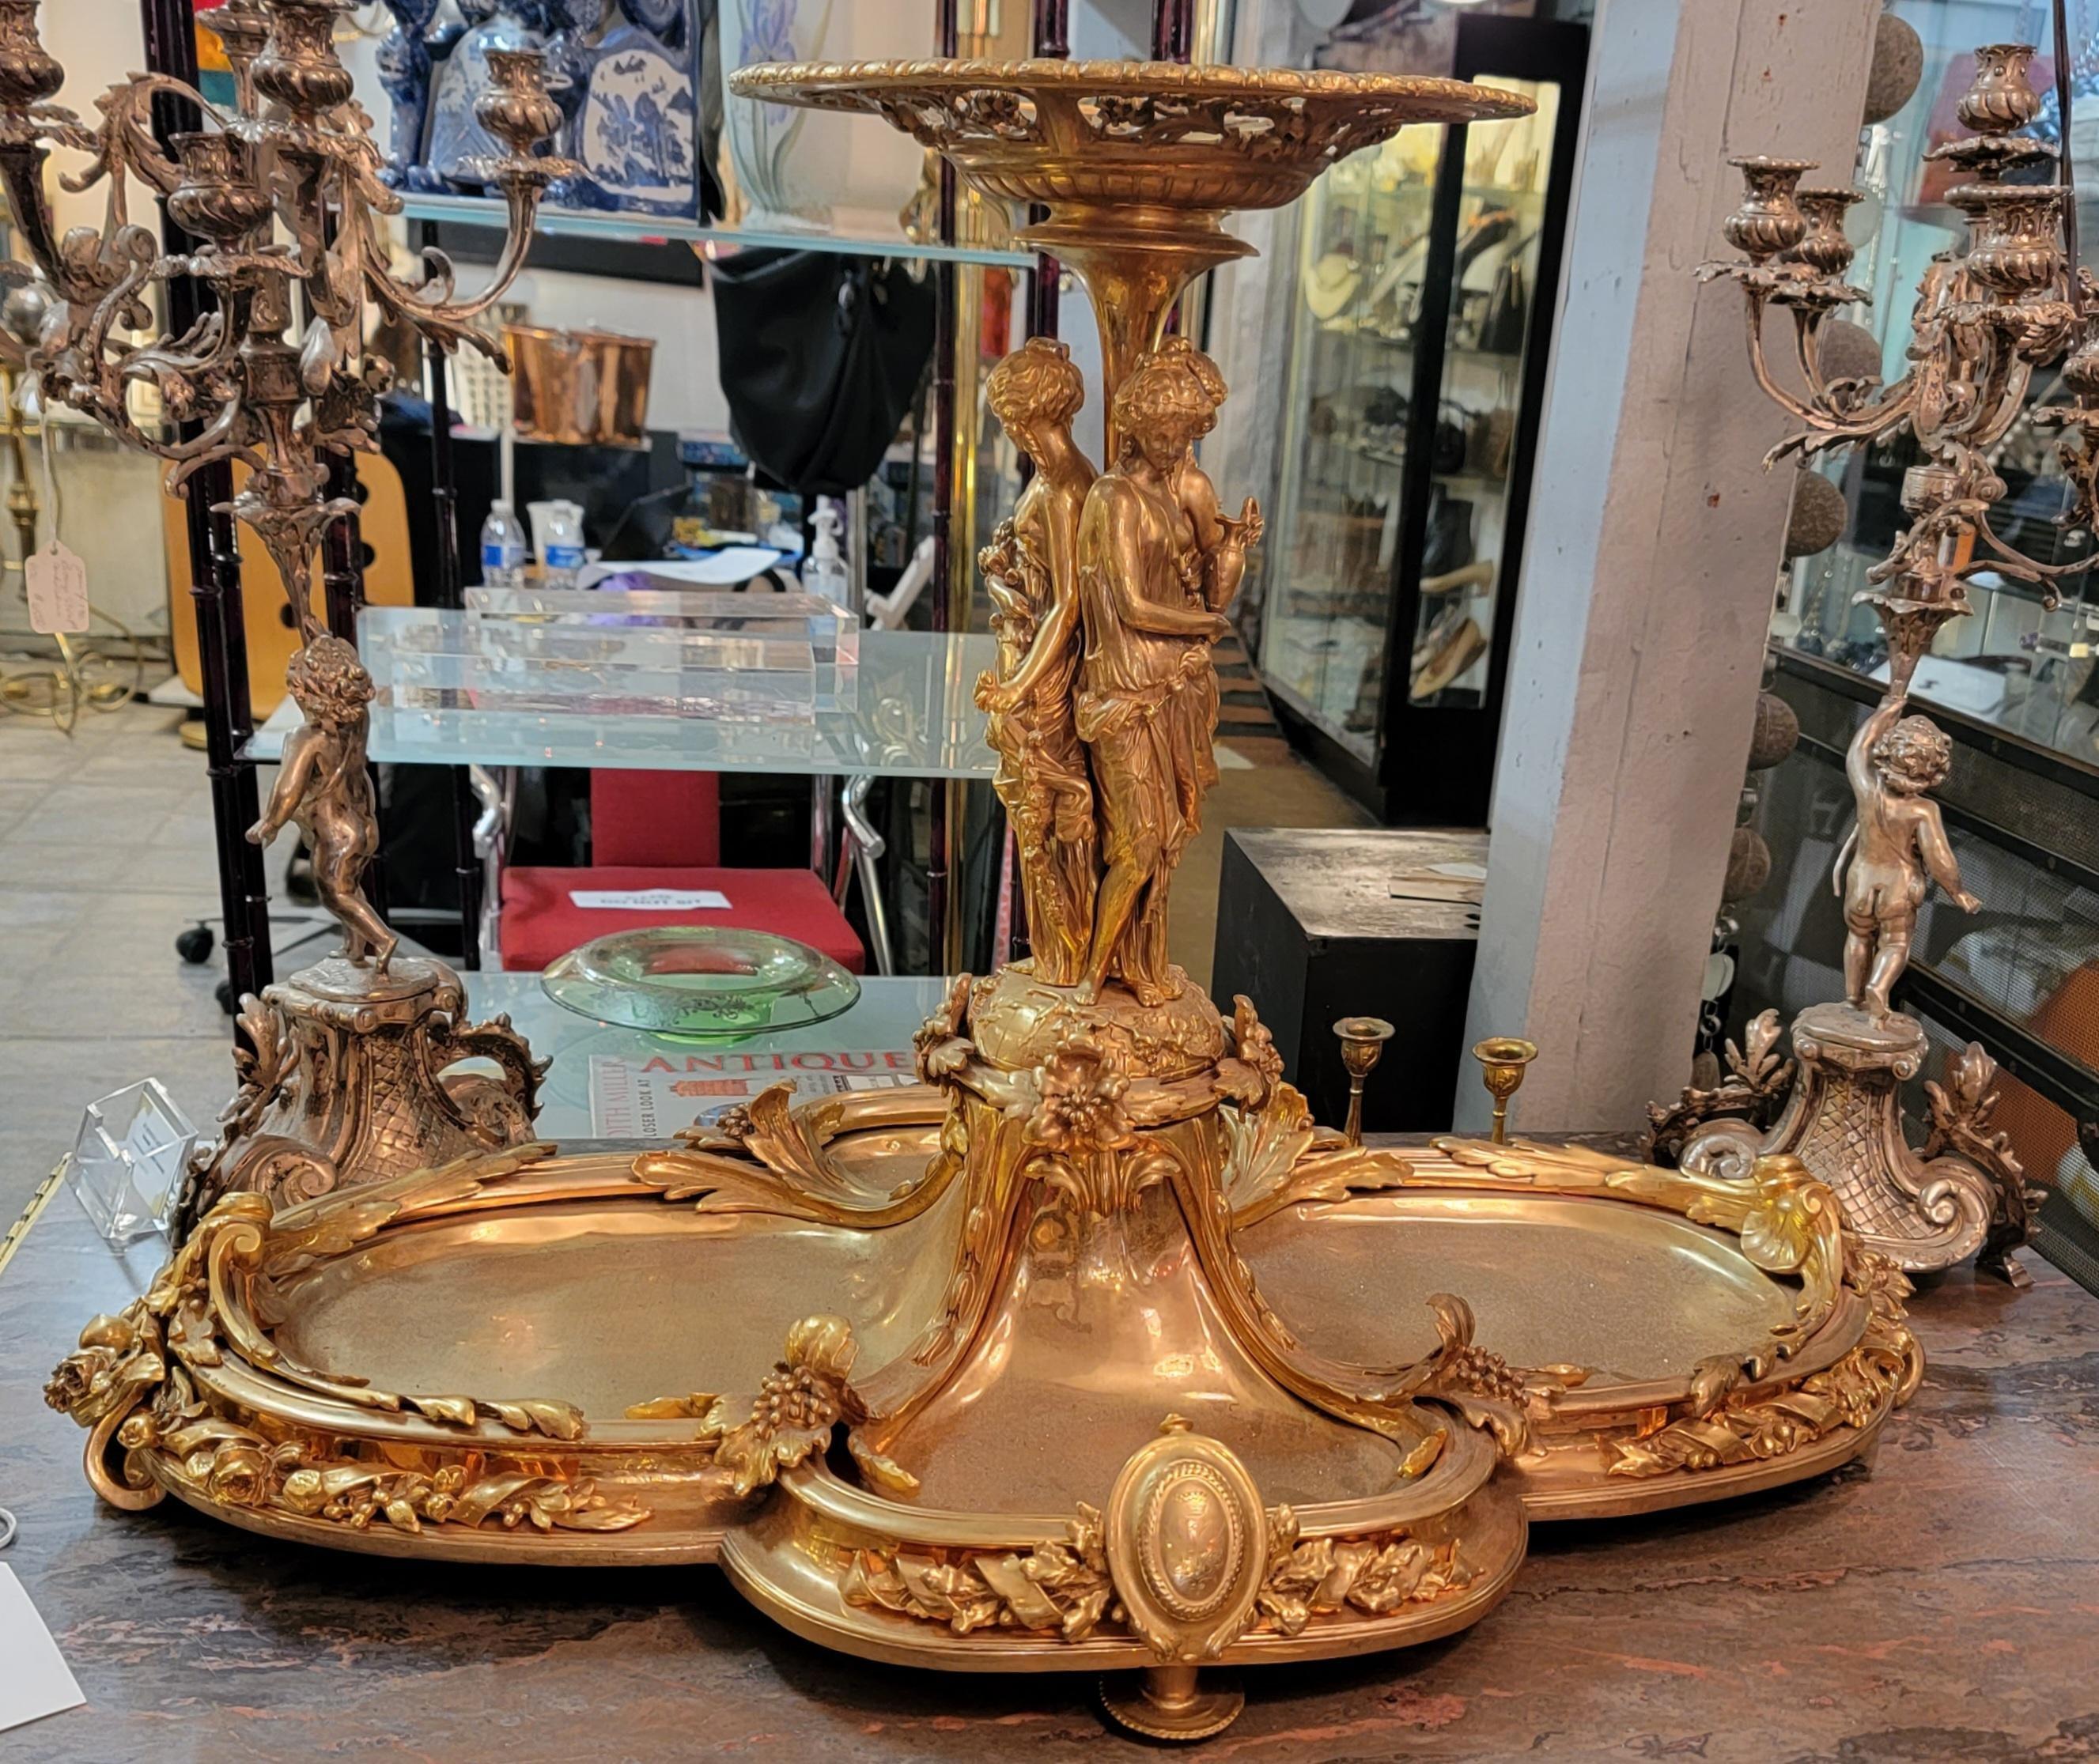 A French Gilt Bronze Figural Centerpiece. Decorated with 3-female figures, each with a basket of flowers or a pitcher. Having a plaque with coat of arms on either side of the plateau.

Dimensions: Height: 24